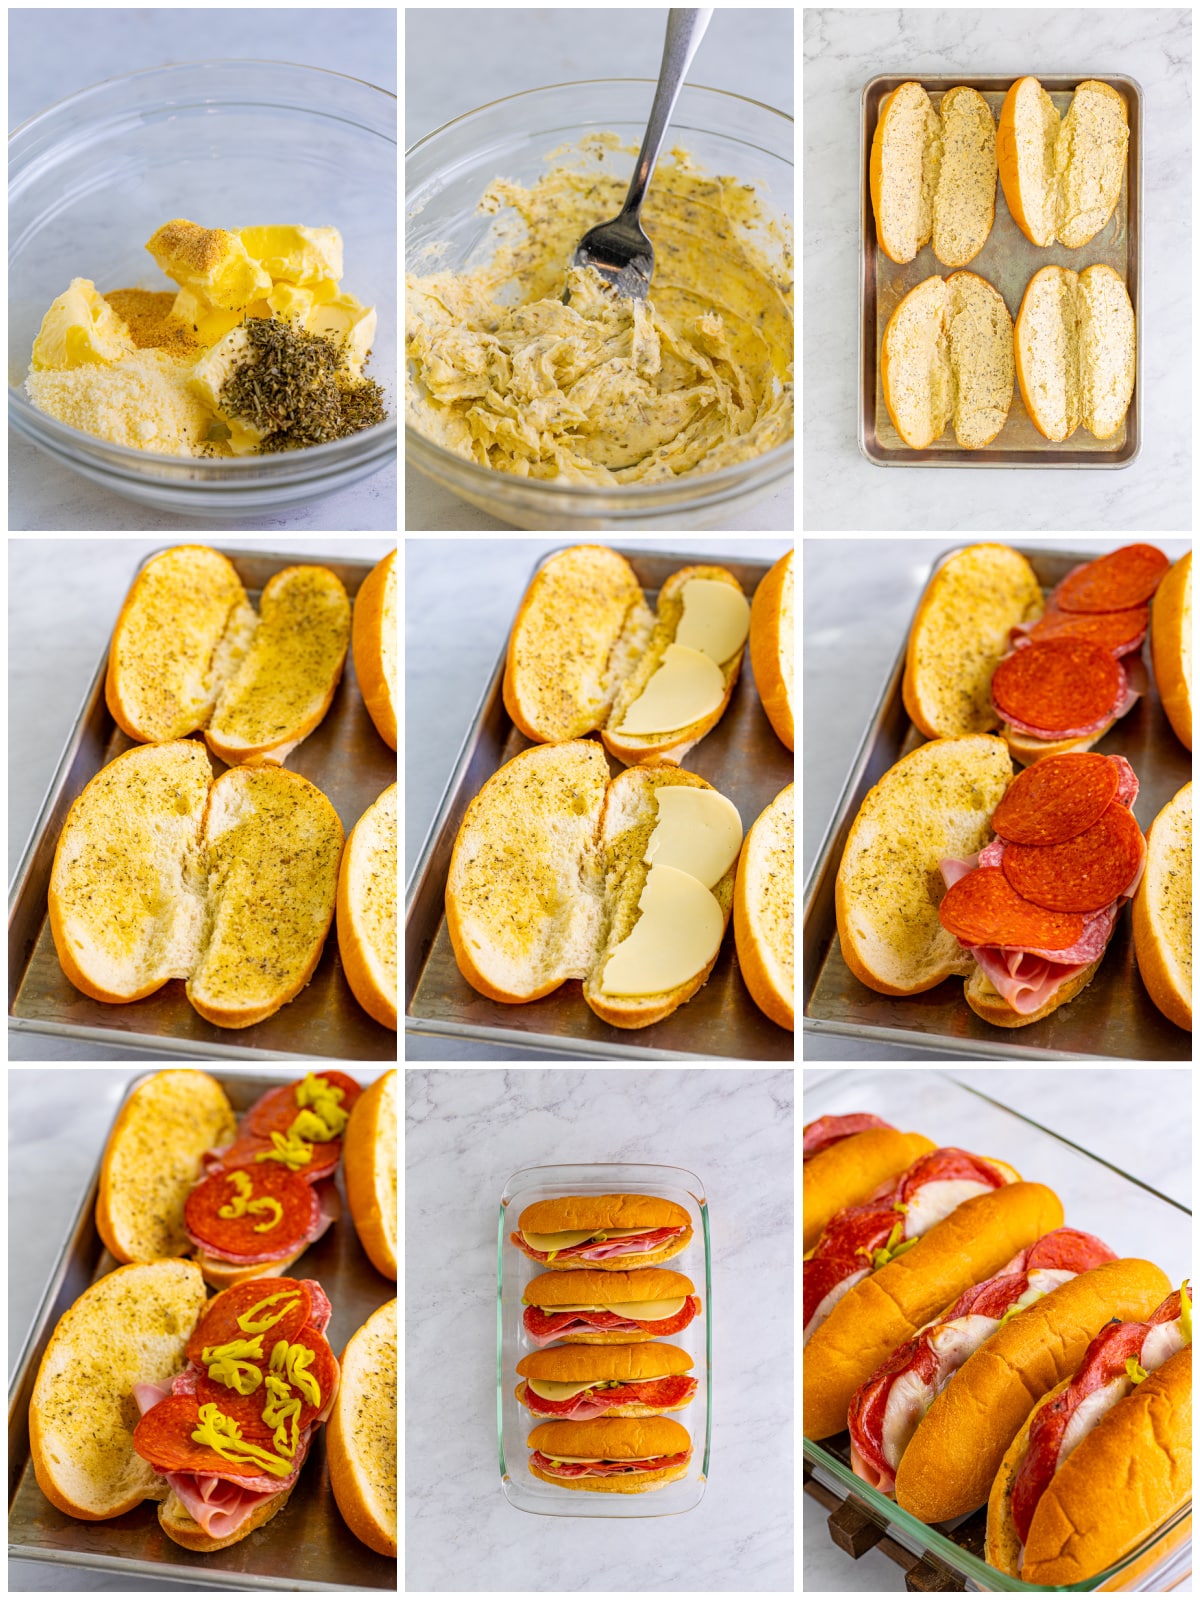 Step by step photos on how to make Italian Subs.